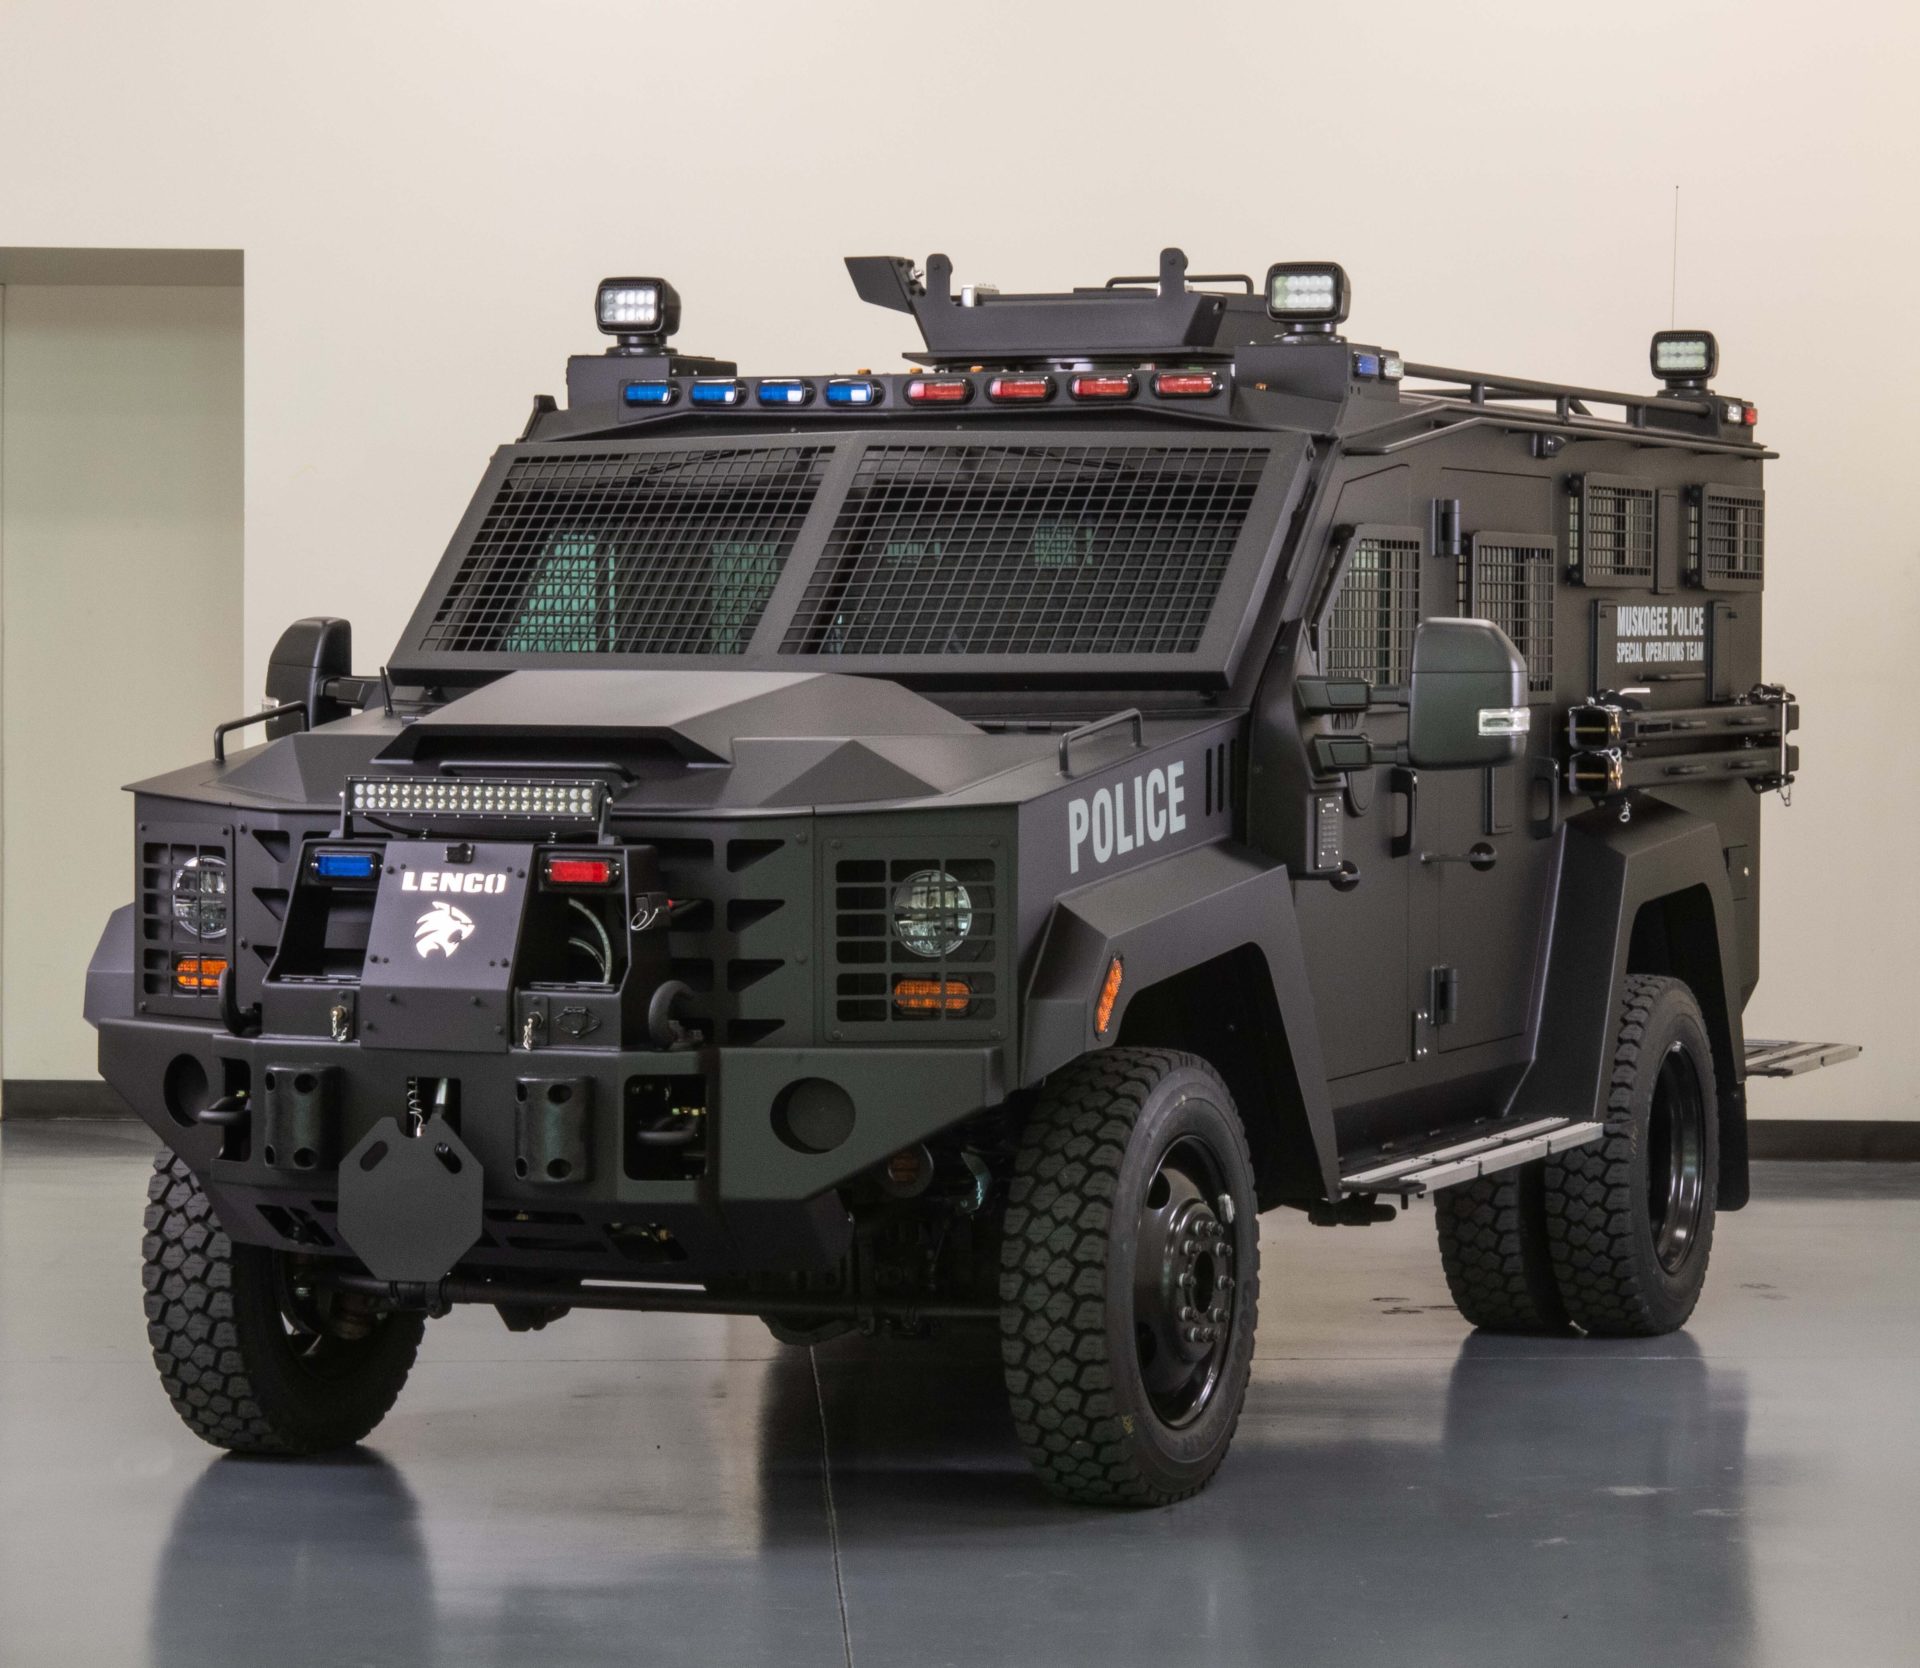 LENCO ARMORED VEHICLES PROVIDES WESTERN AUSTRALIA POLICE FORCE WITH TWO NEW CUSTOM-BUILT BEARCAT ARMORED VEHICLES FOR TACTICAL RESPONSE